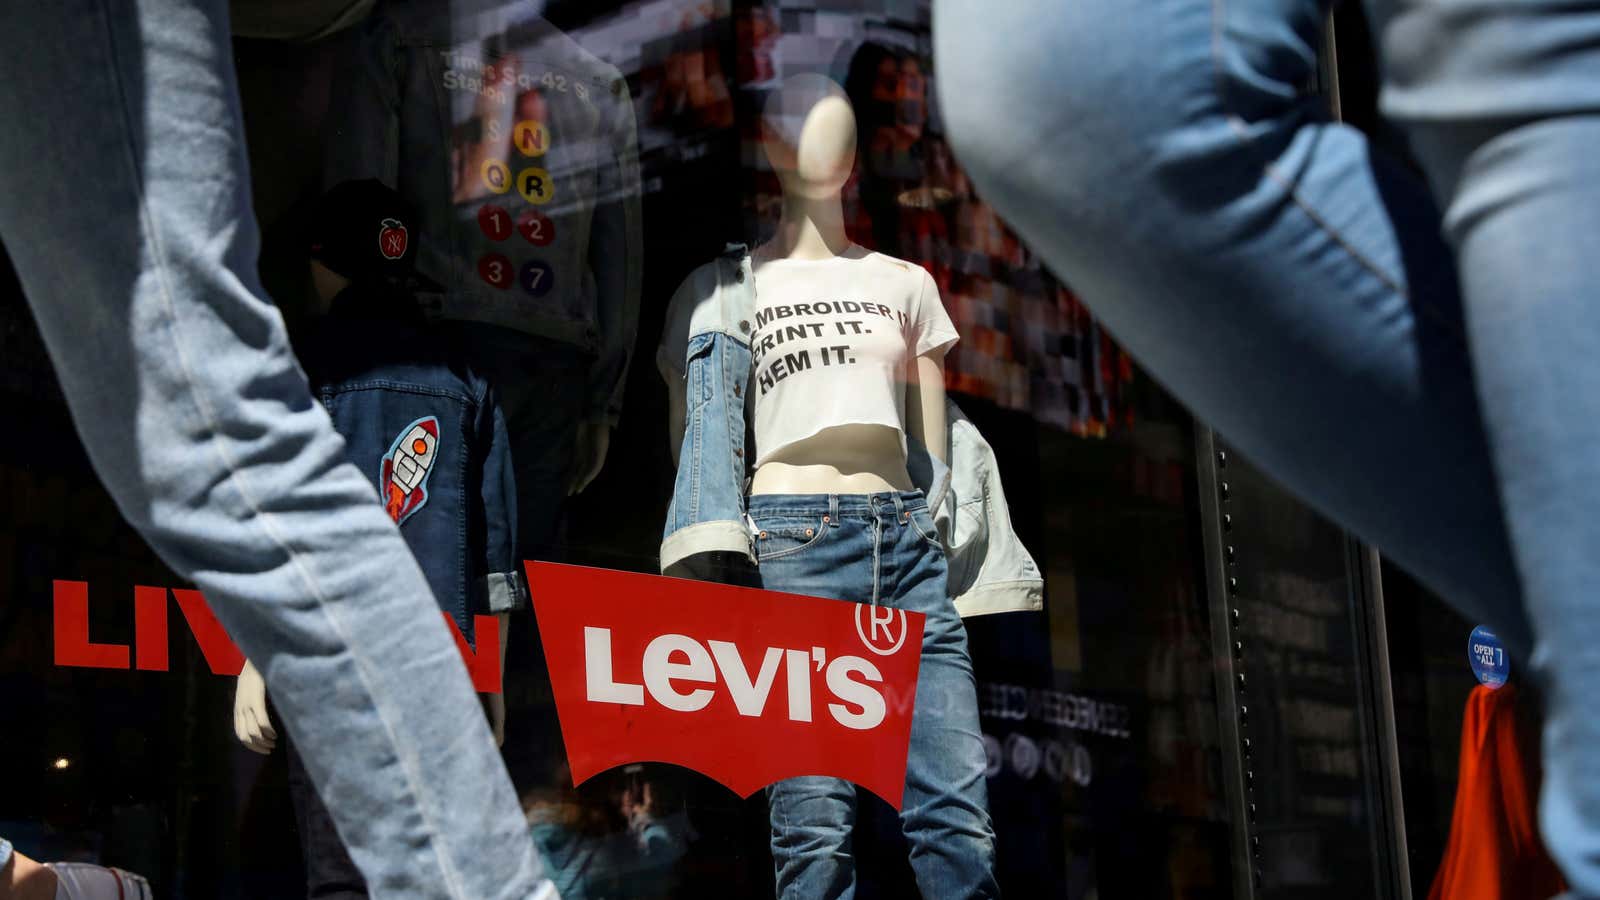 Levi’s is finding success selling sweats.